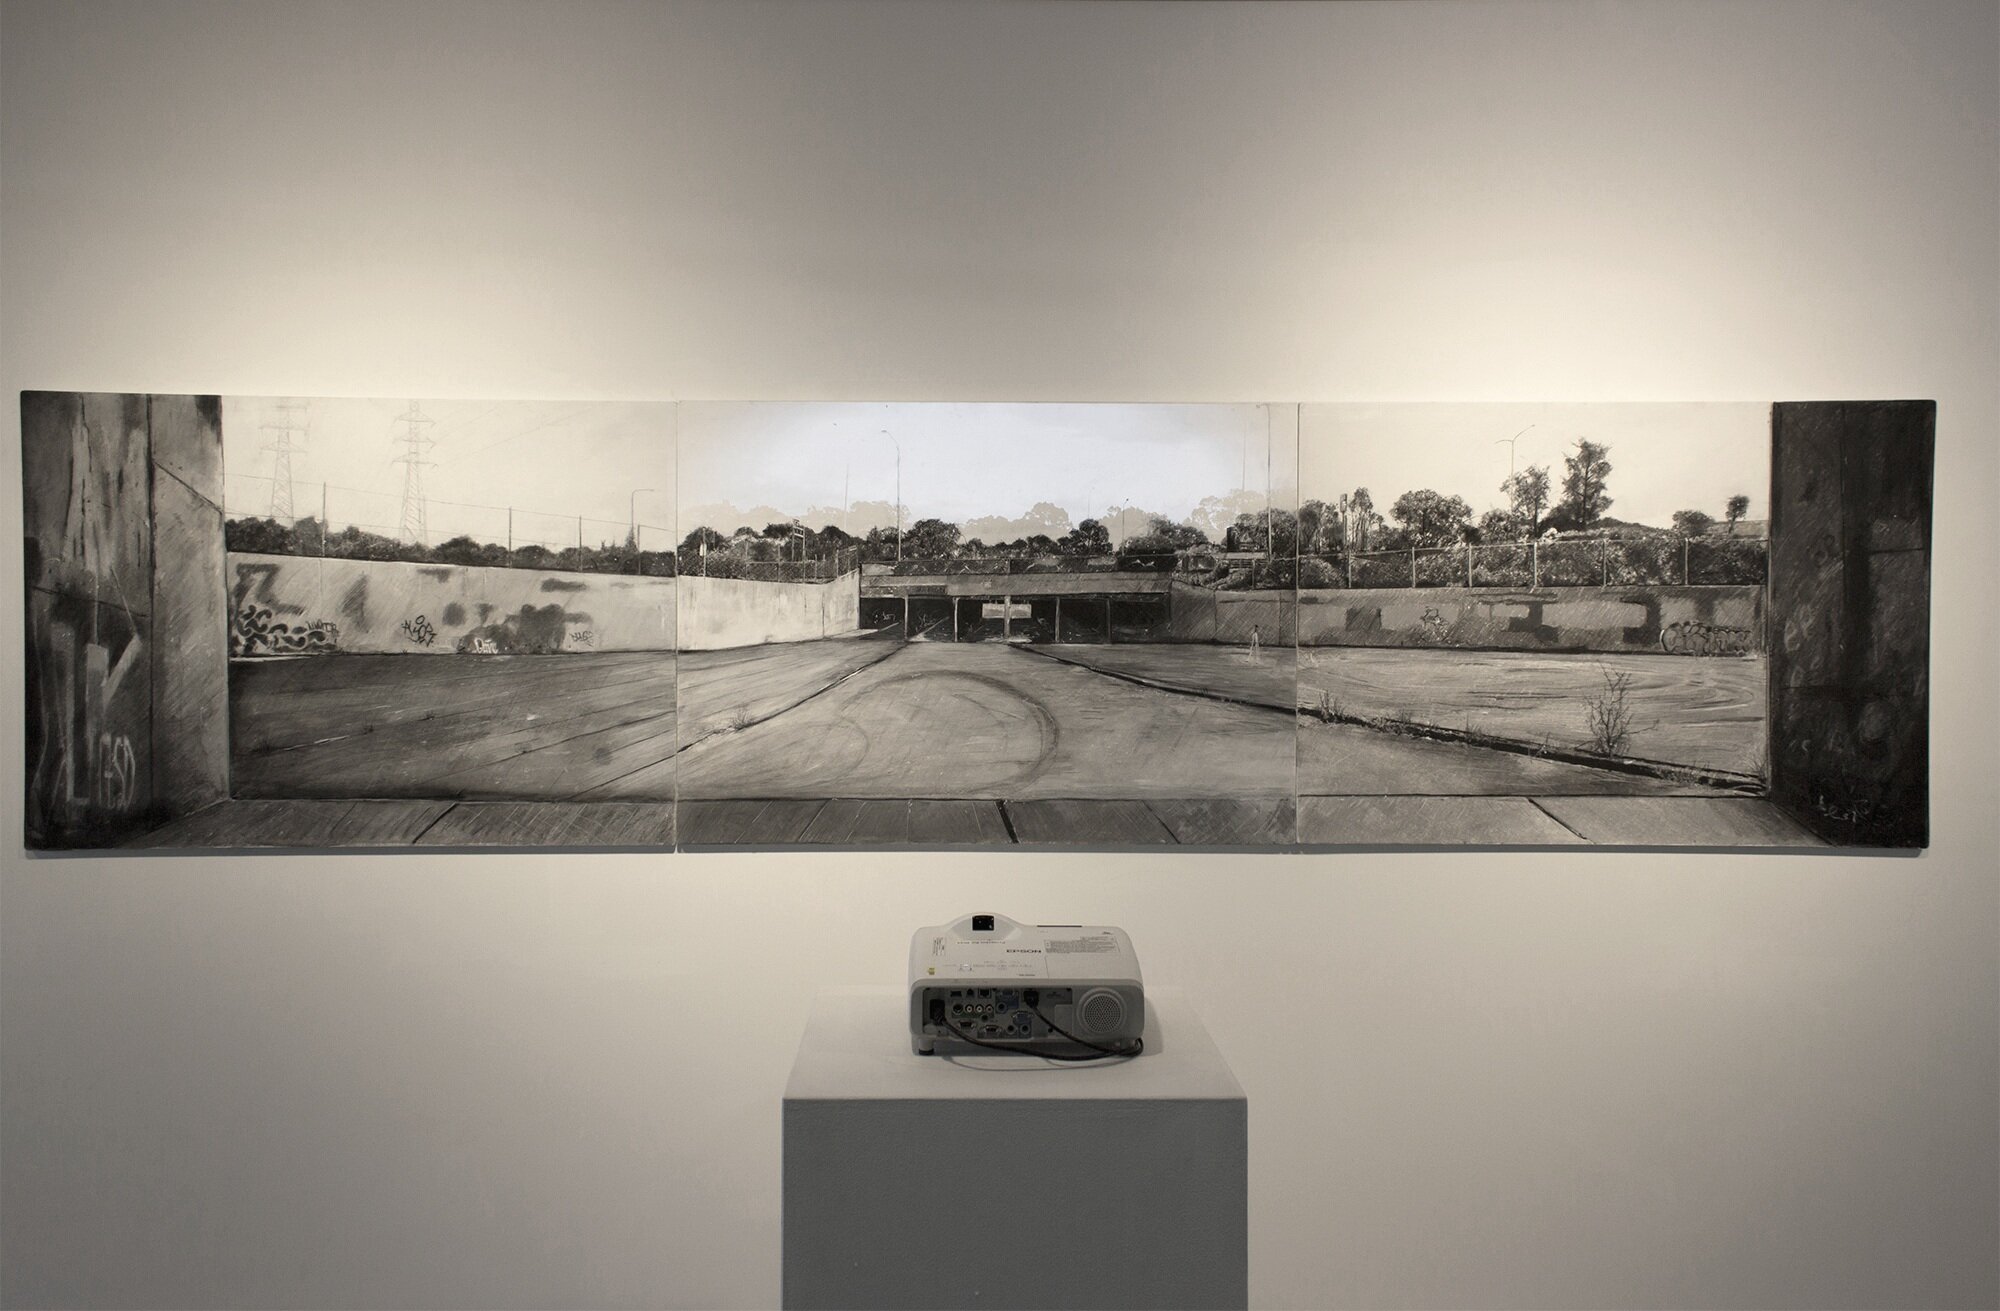   Under the southern freeway  2019  charcoal mixed media on gesso hardboard with animation  85 x 118.5 cm x 3 pieces (triptych) 